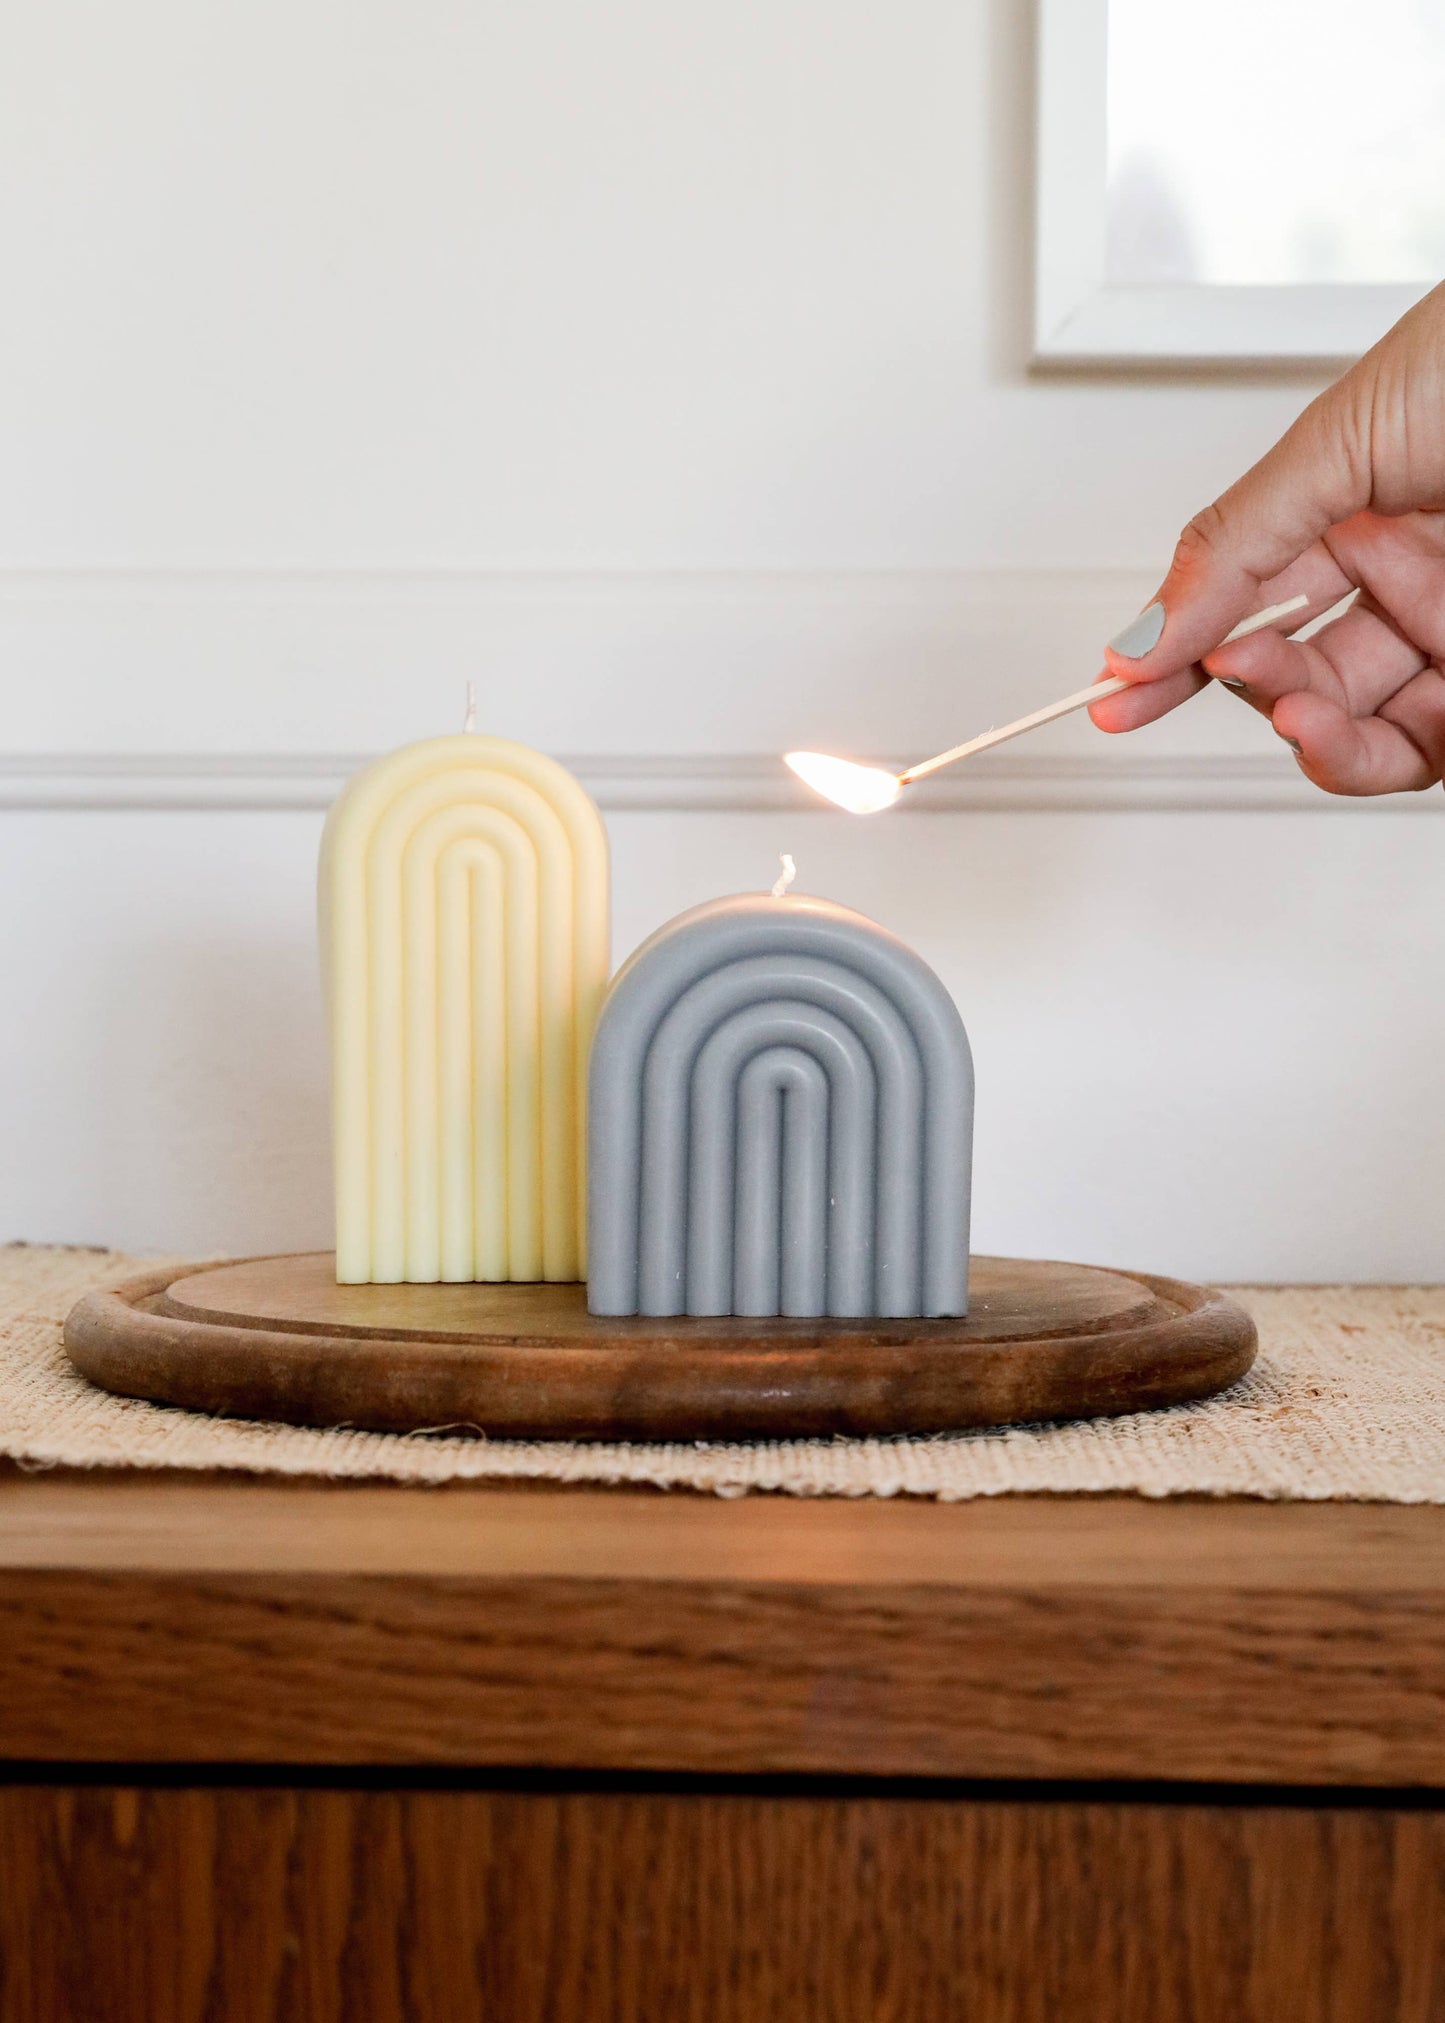 JaxKelly - Tall Arch Butter Candle